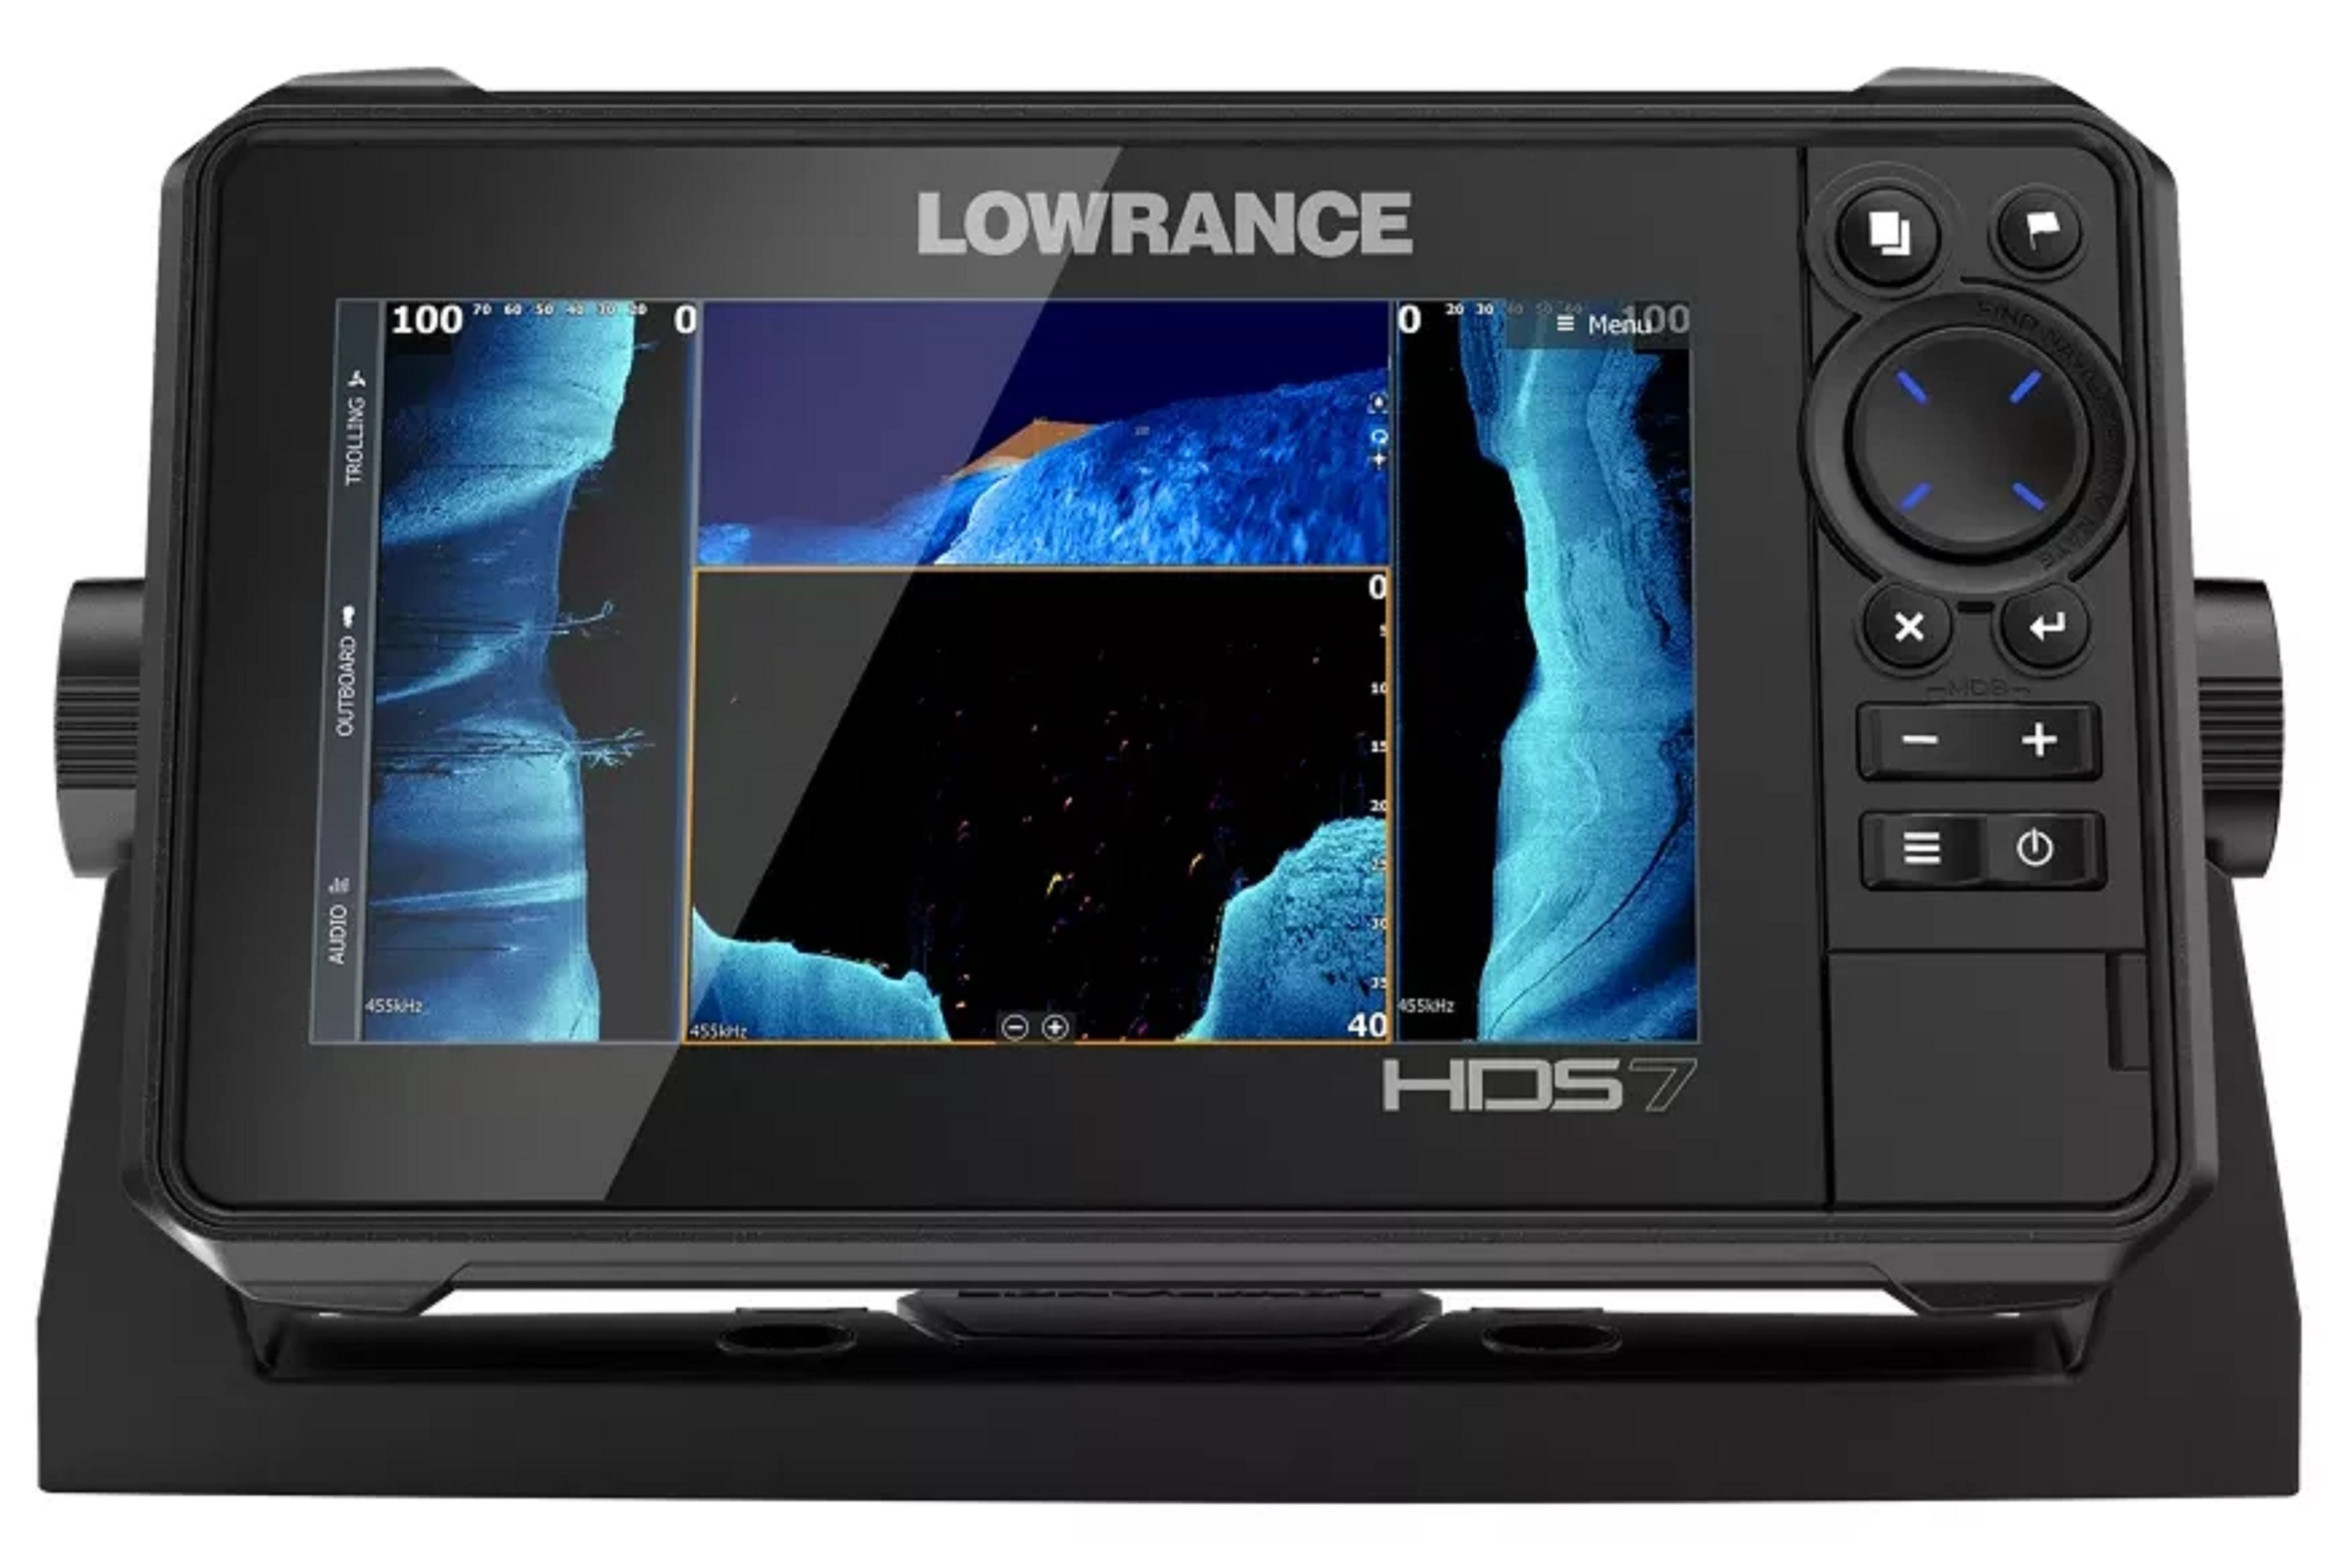 Lowrance HDS-7 Live - 7-inch Fish Finder with Active Imaging 3 in 1 Transducer $598 @ Walmart (Fishing)